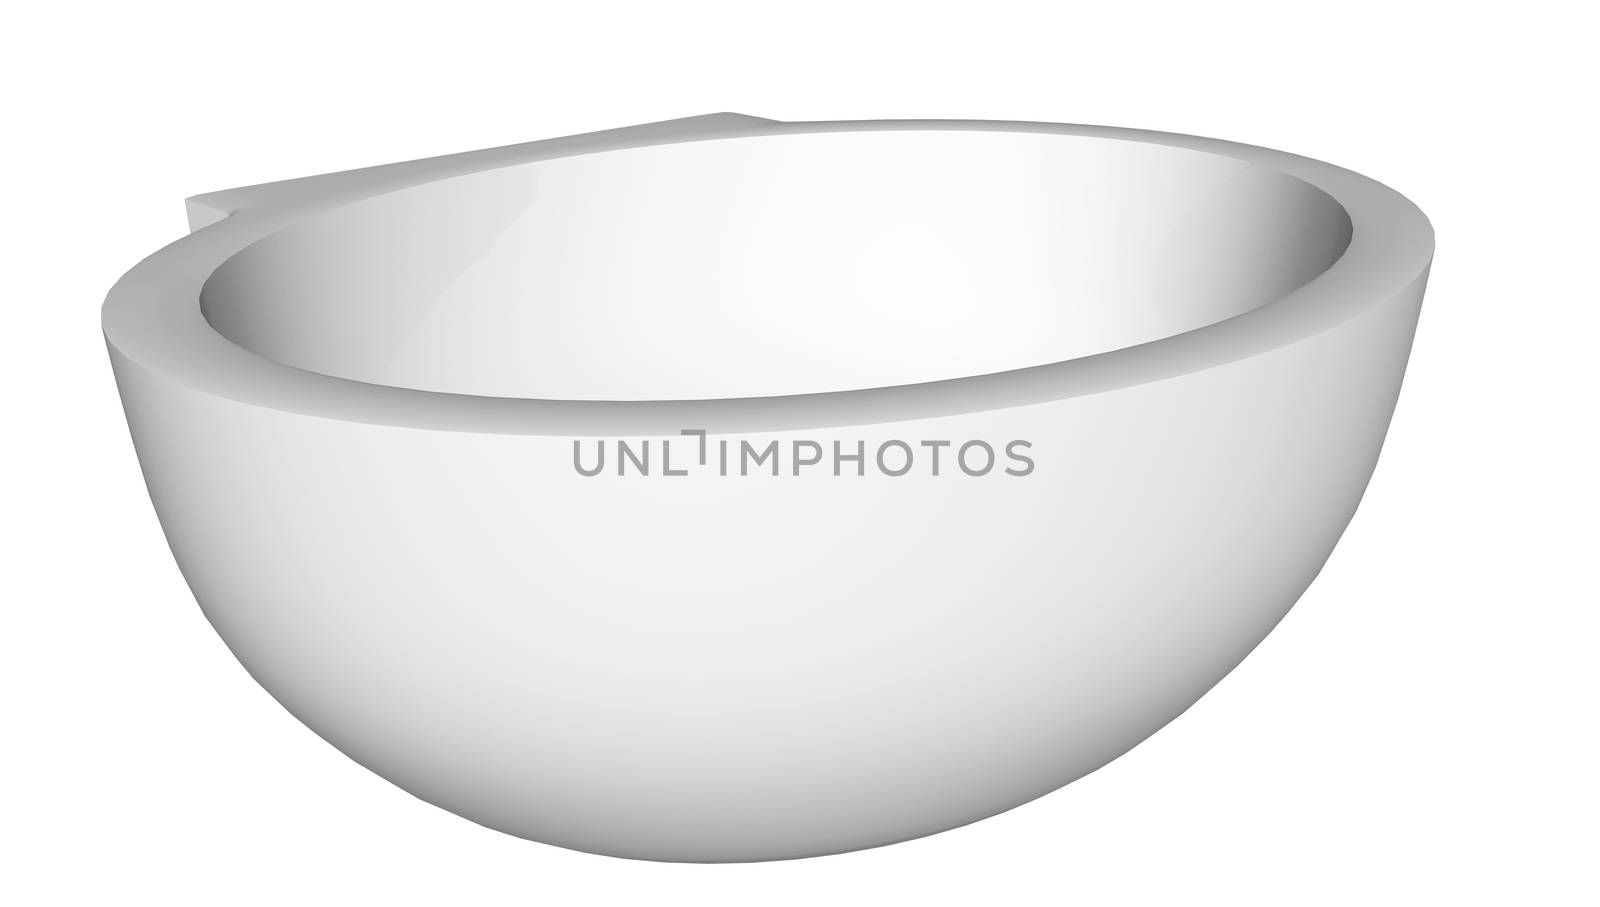 Modern egg-shapped washbasin or sink, isolated against a white background. by Morphart